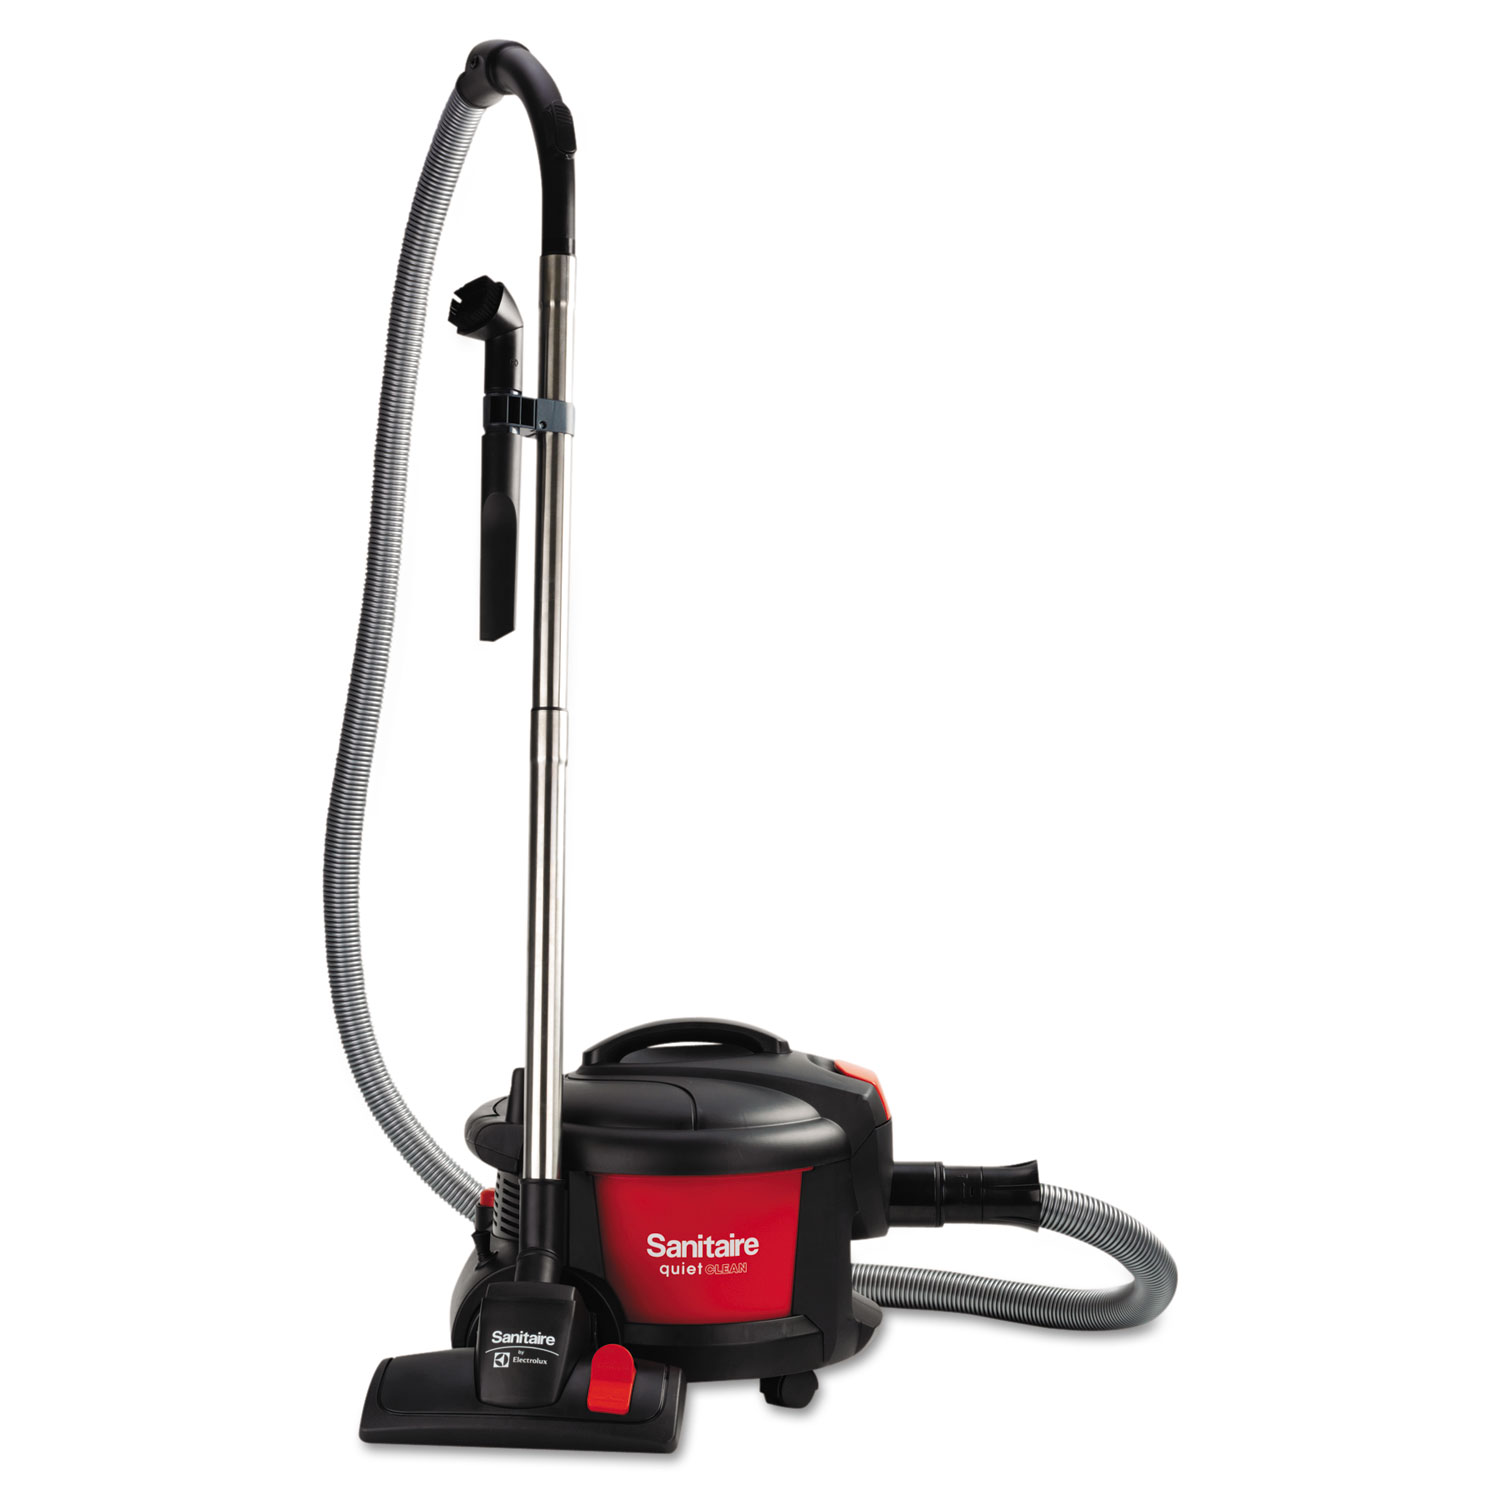 Electrolux Floor Care Extend Top-Hat Canister Vacuum, 9 Amp, 11" Cleaning Path, Red/Black - image 1 of 2